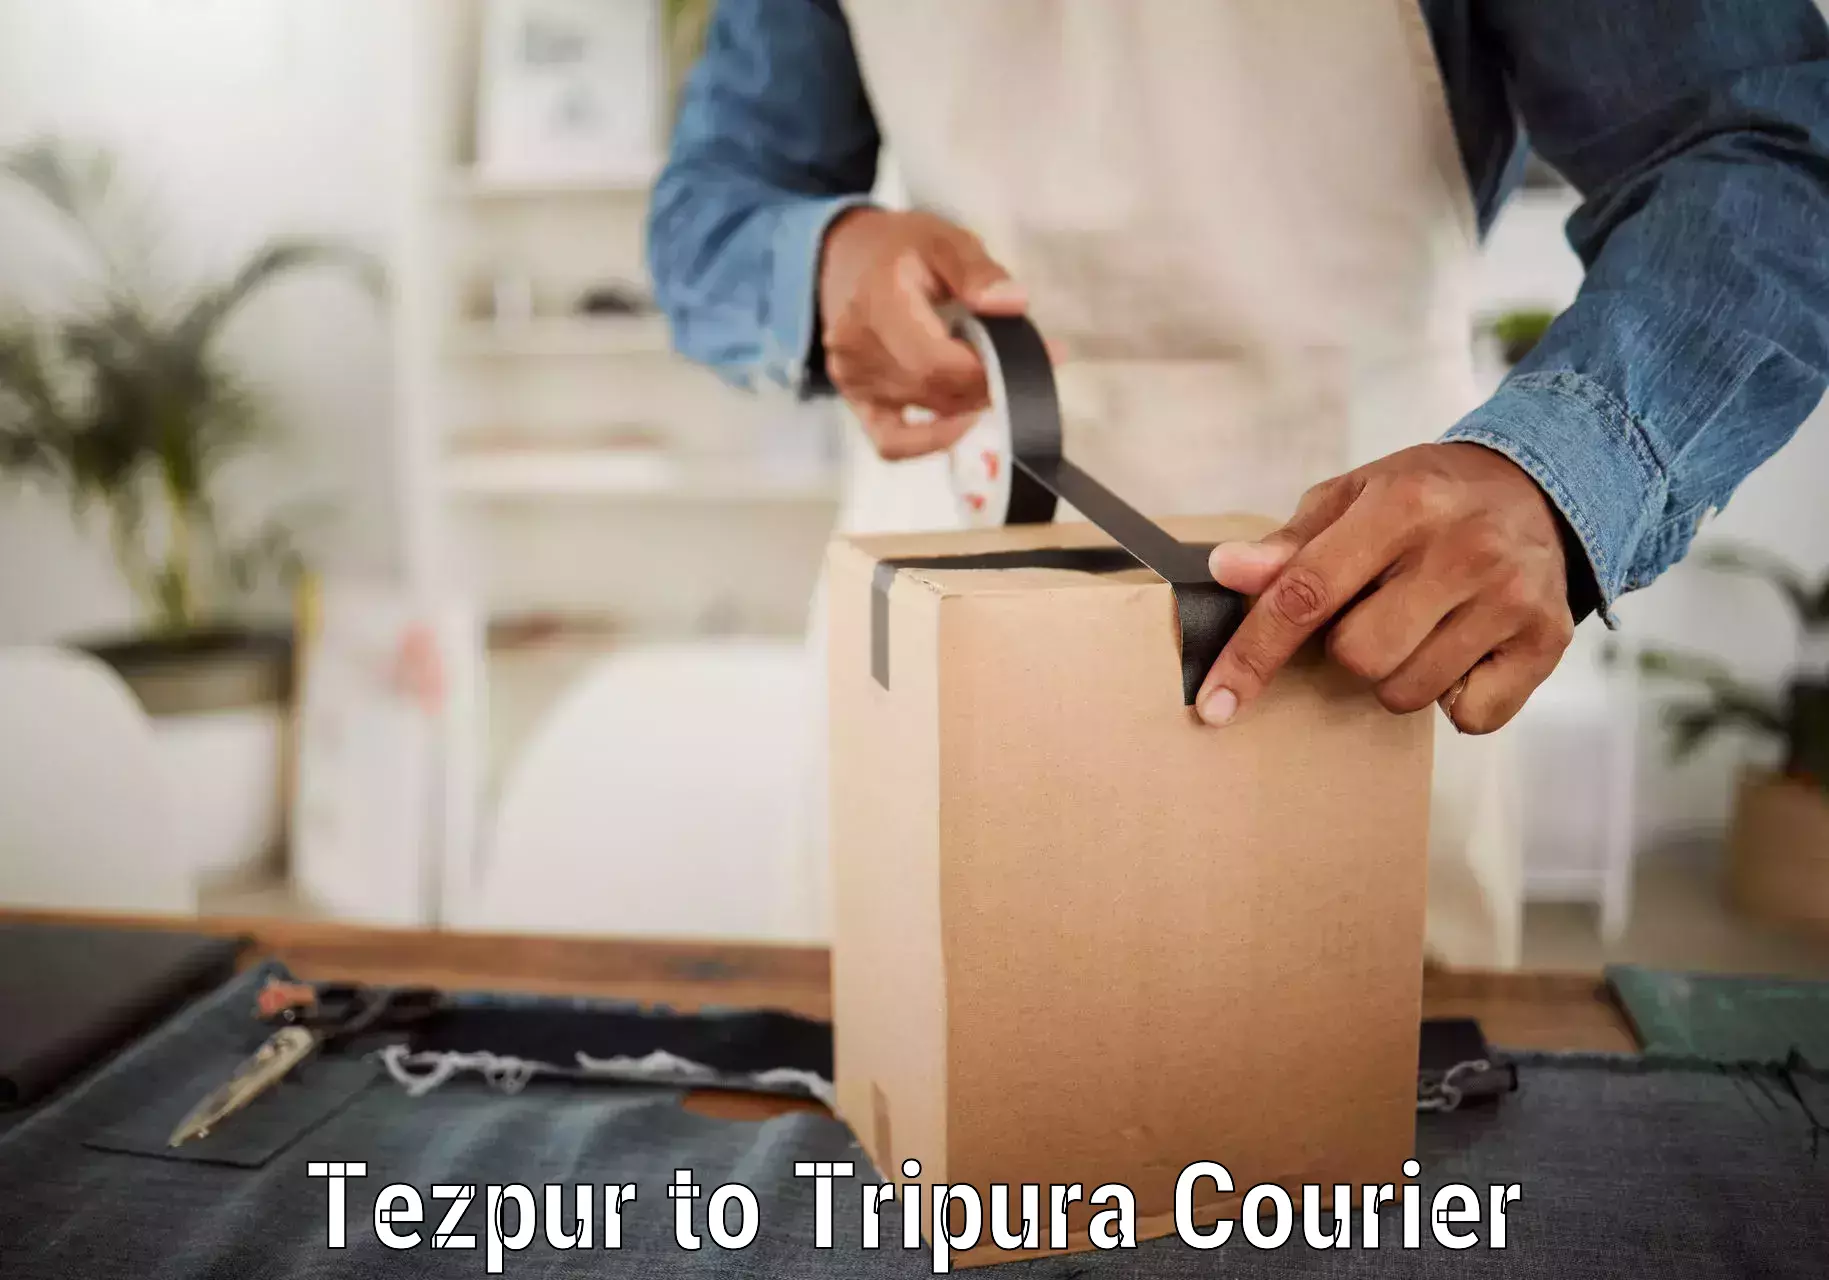 Courier service innovation Tezpur to Tripura